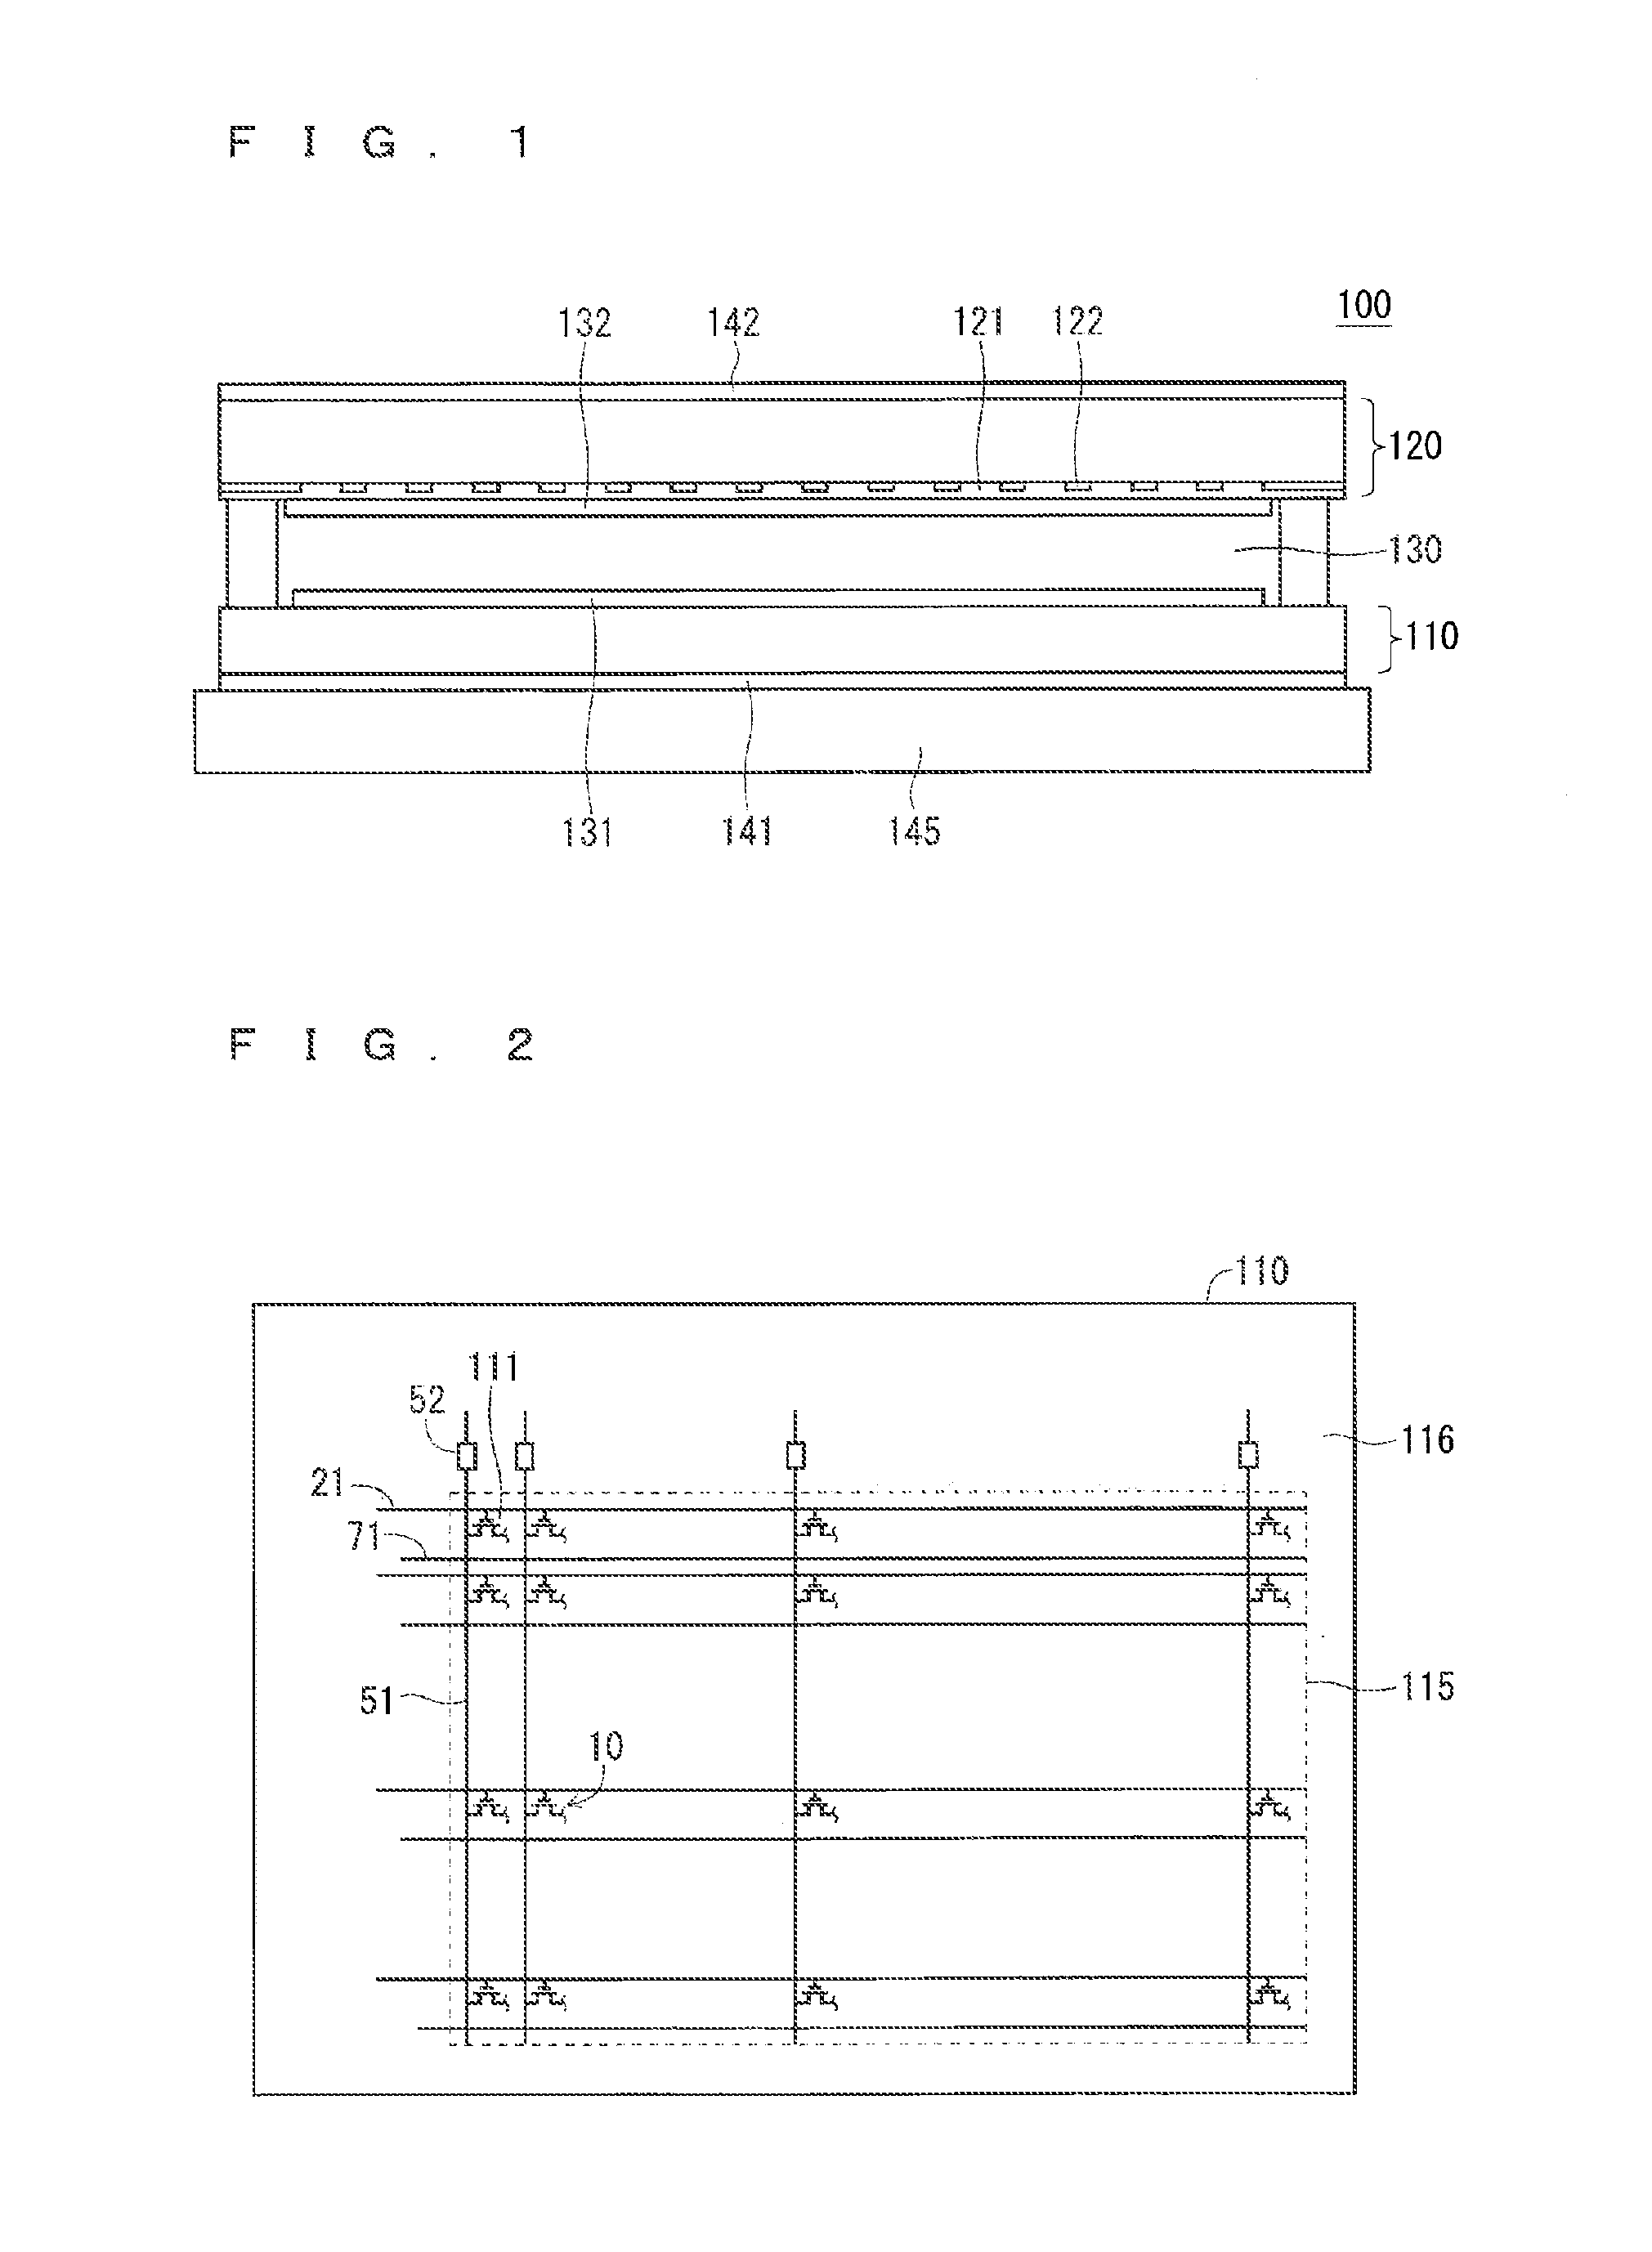 Thin film transistor array substrate